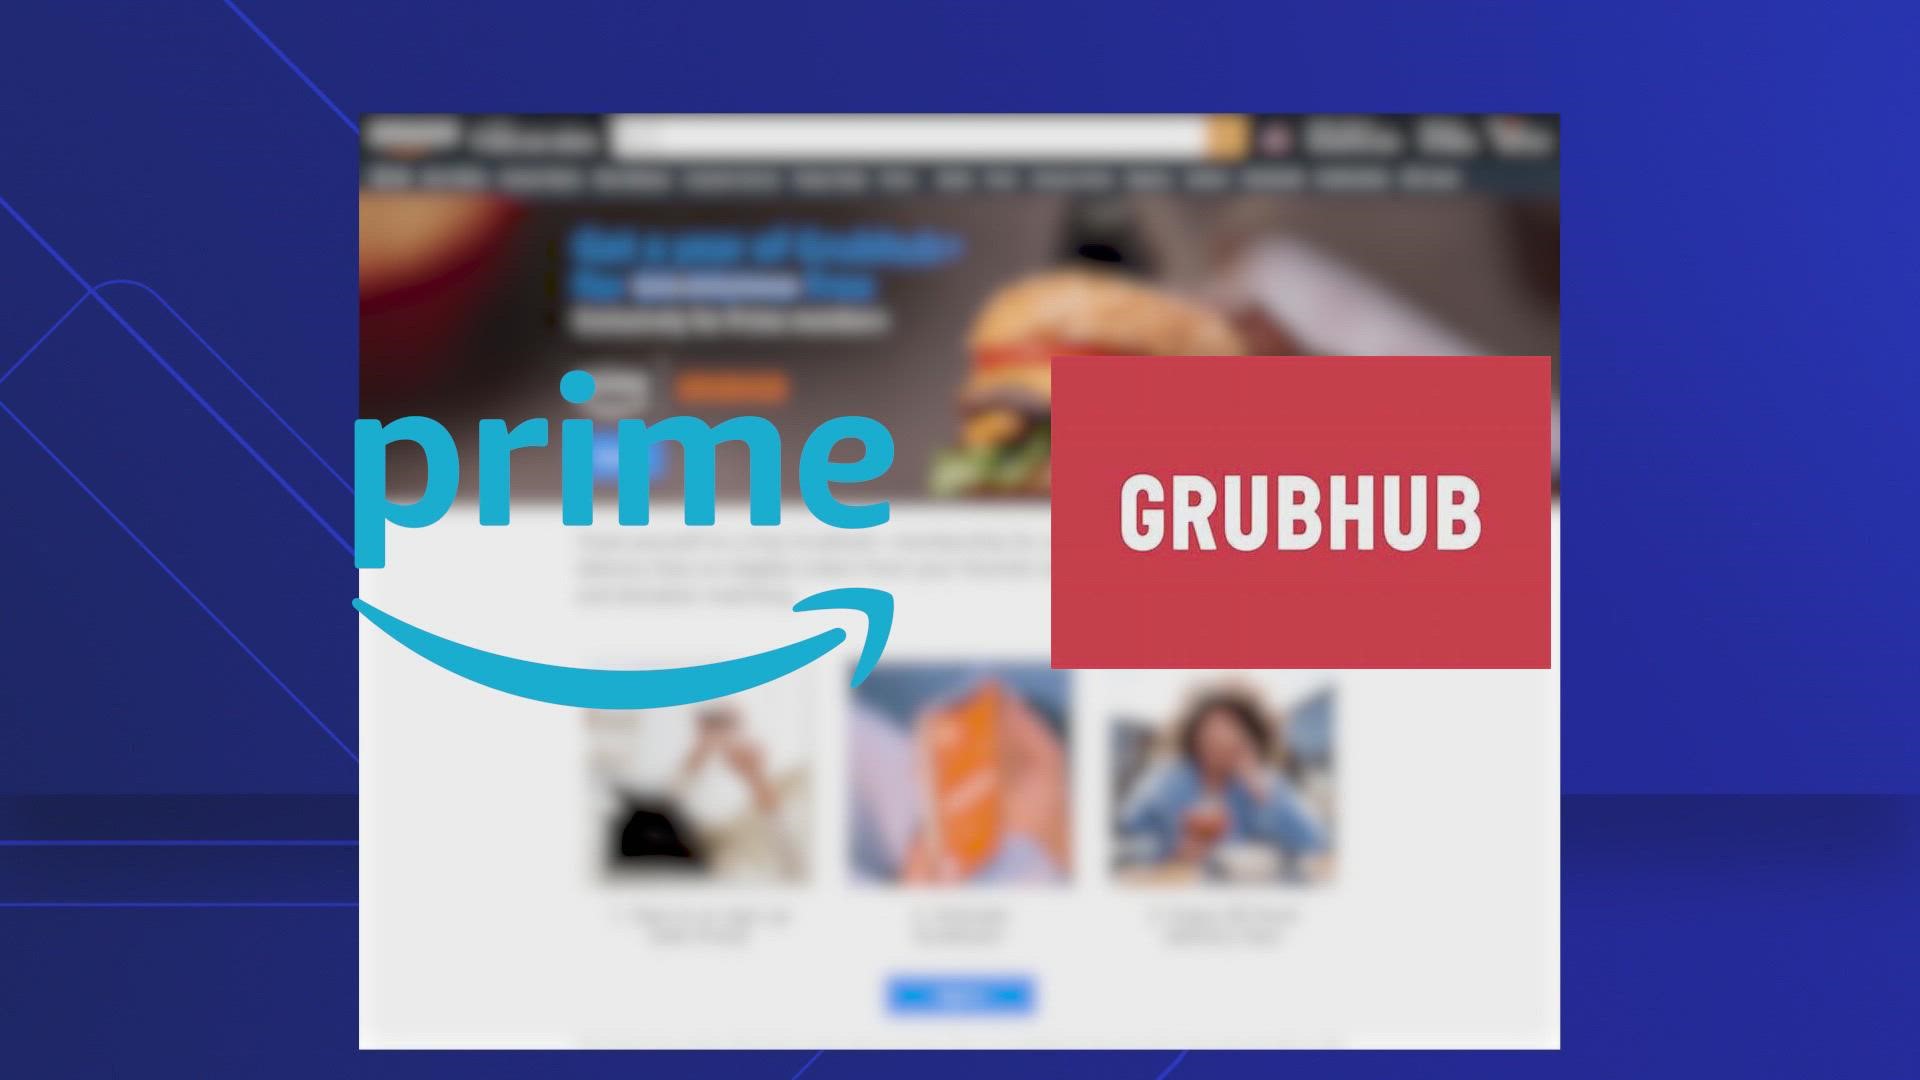 Prime Exclusive Grubhub+ Offer